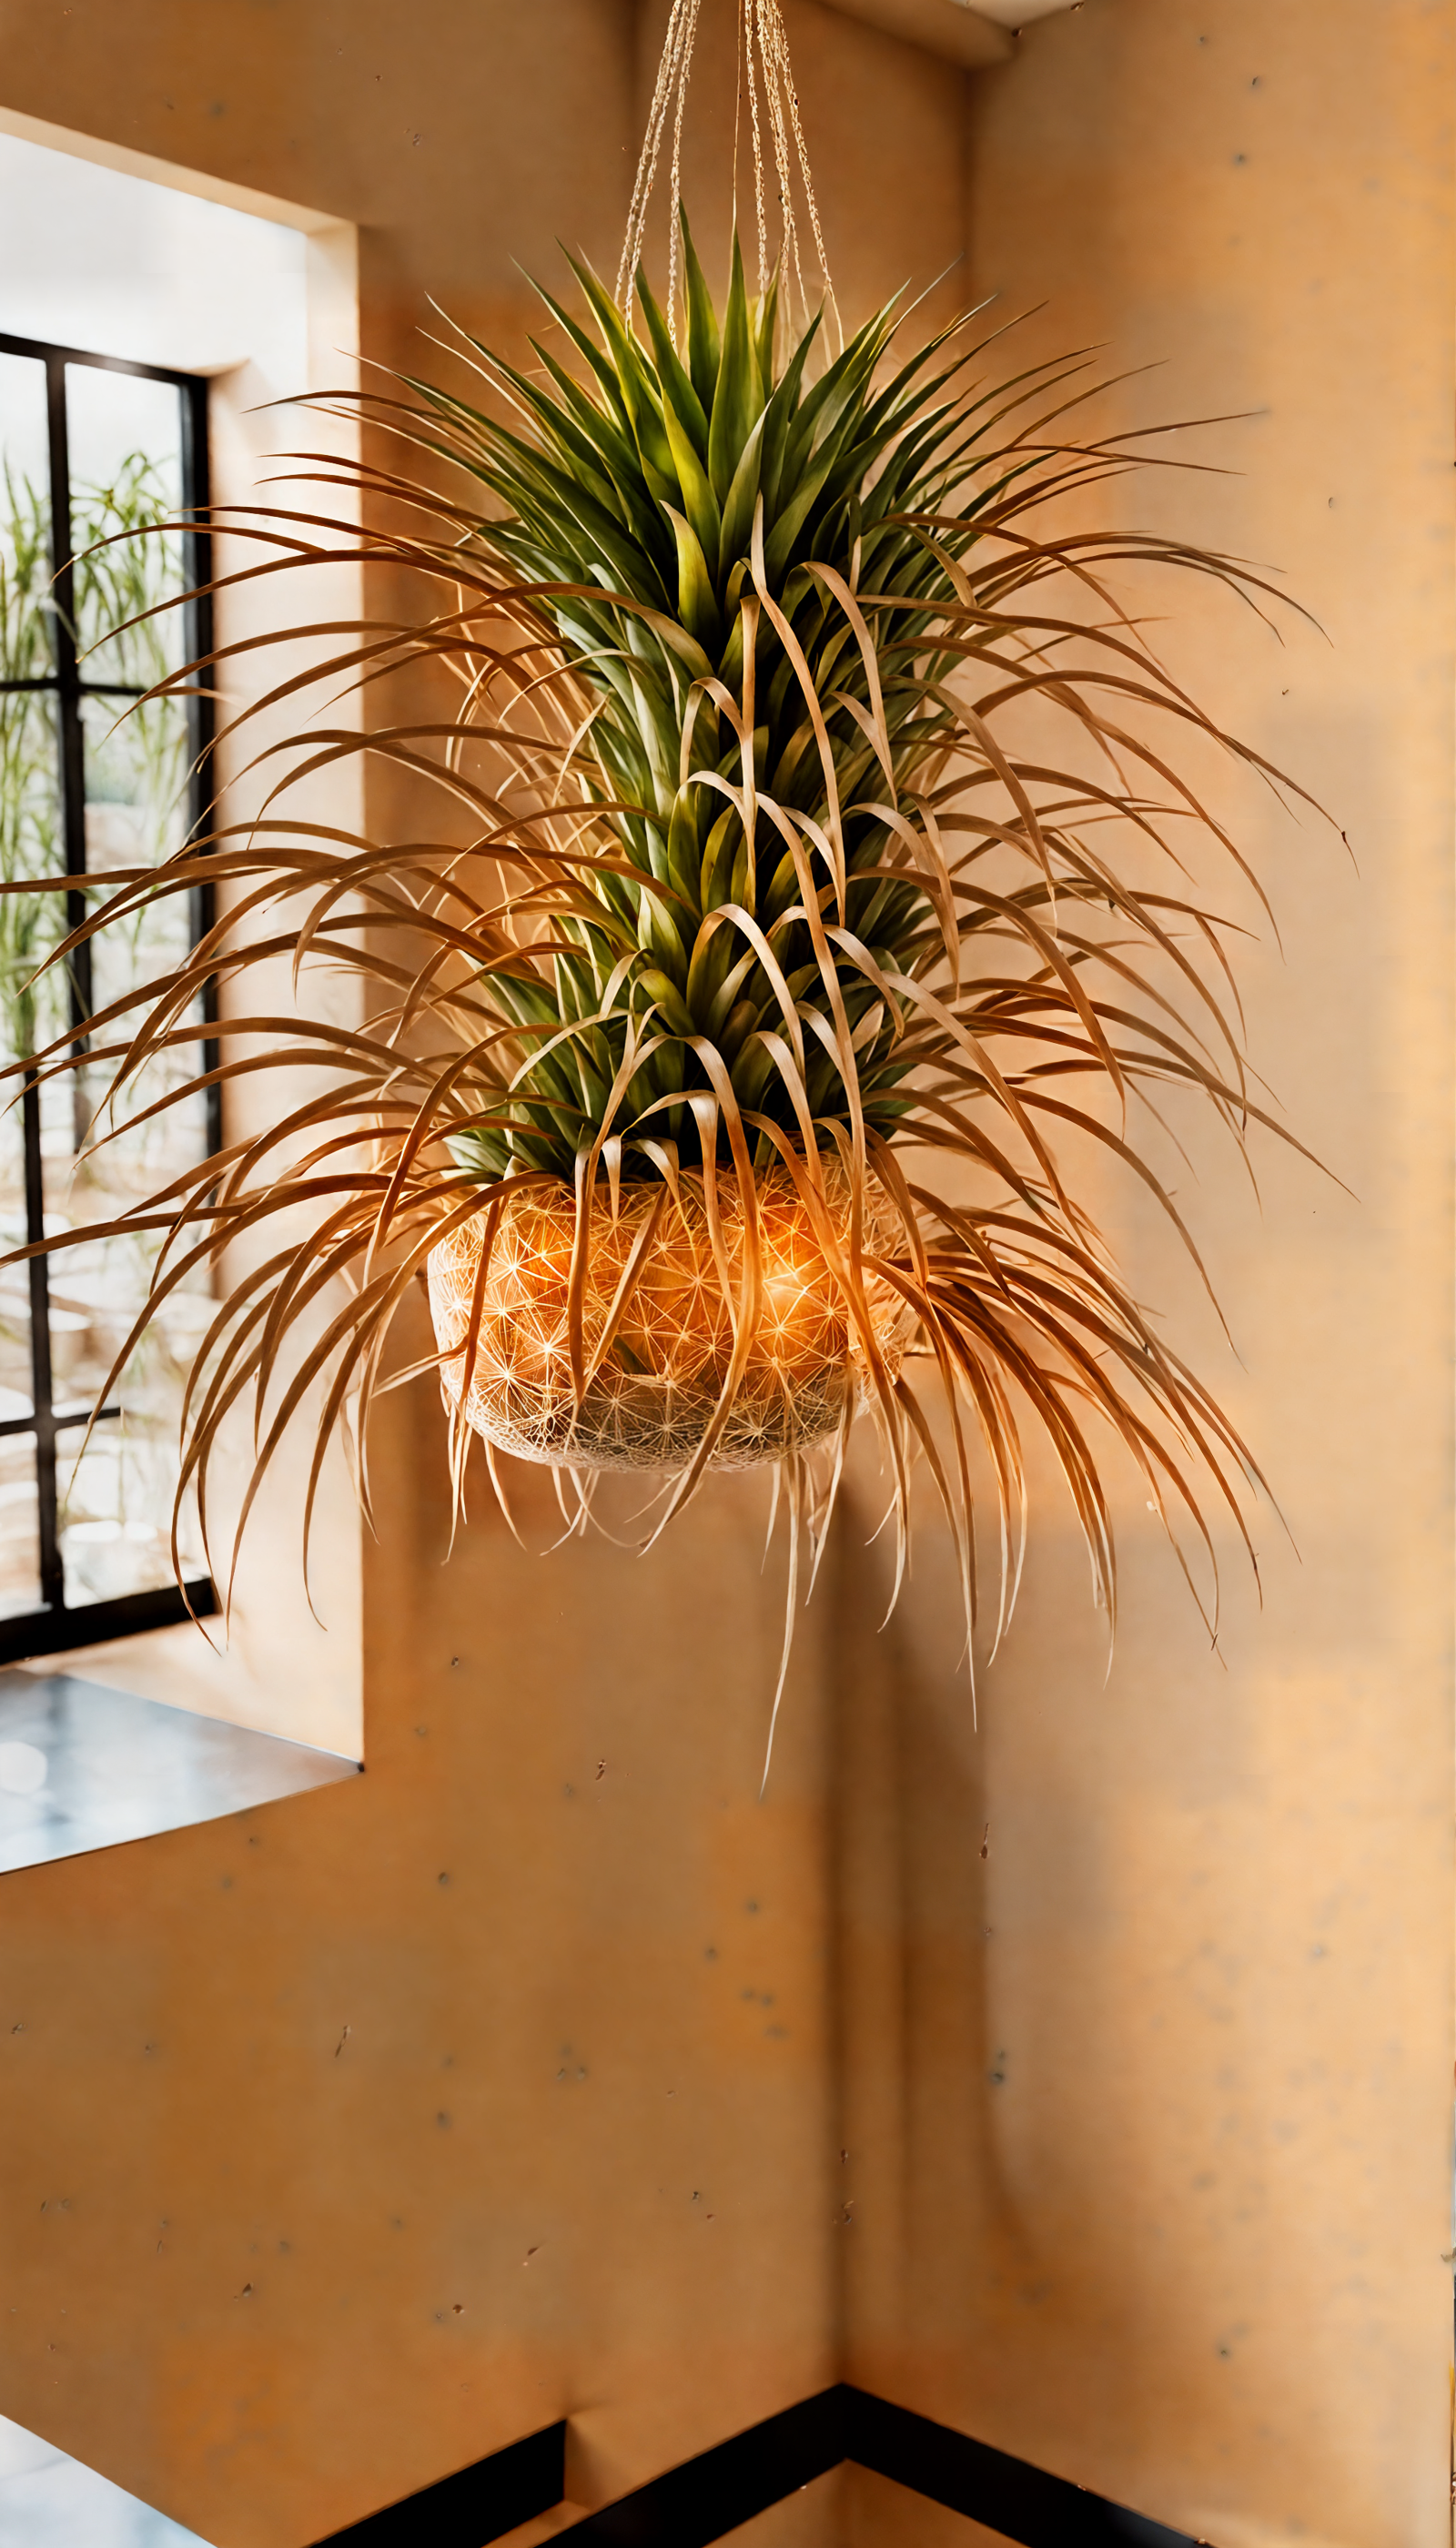 Tillandsia ionantha clump beside a potted plant, clear indoor lighting, detailed leaves, neutral room decor.